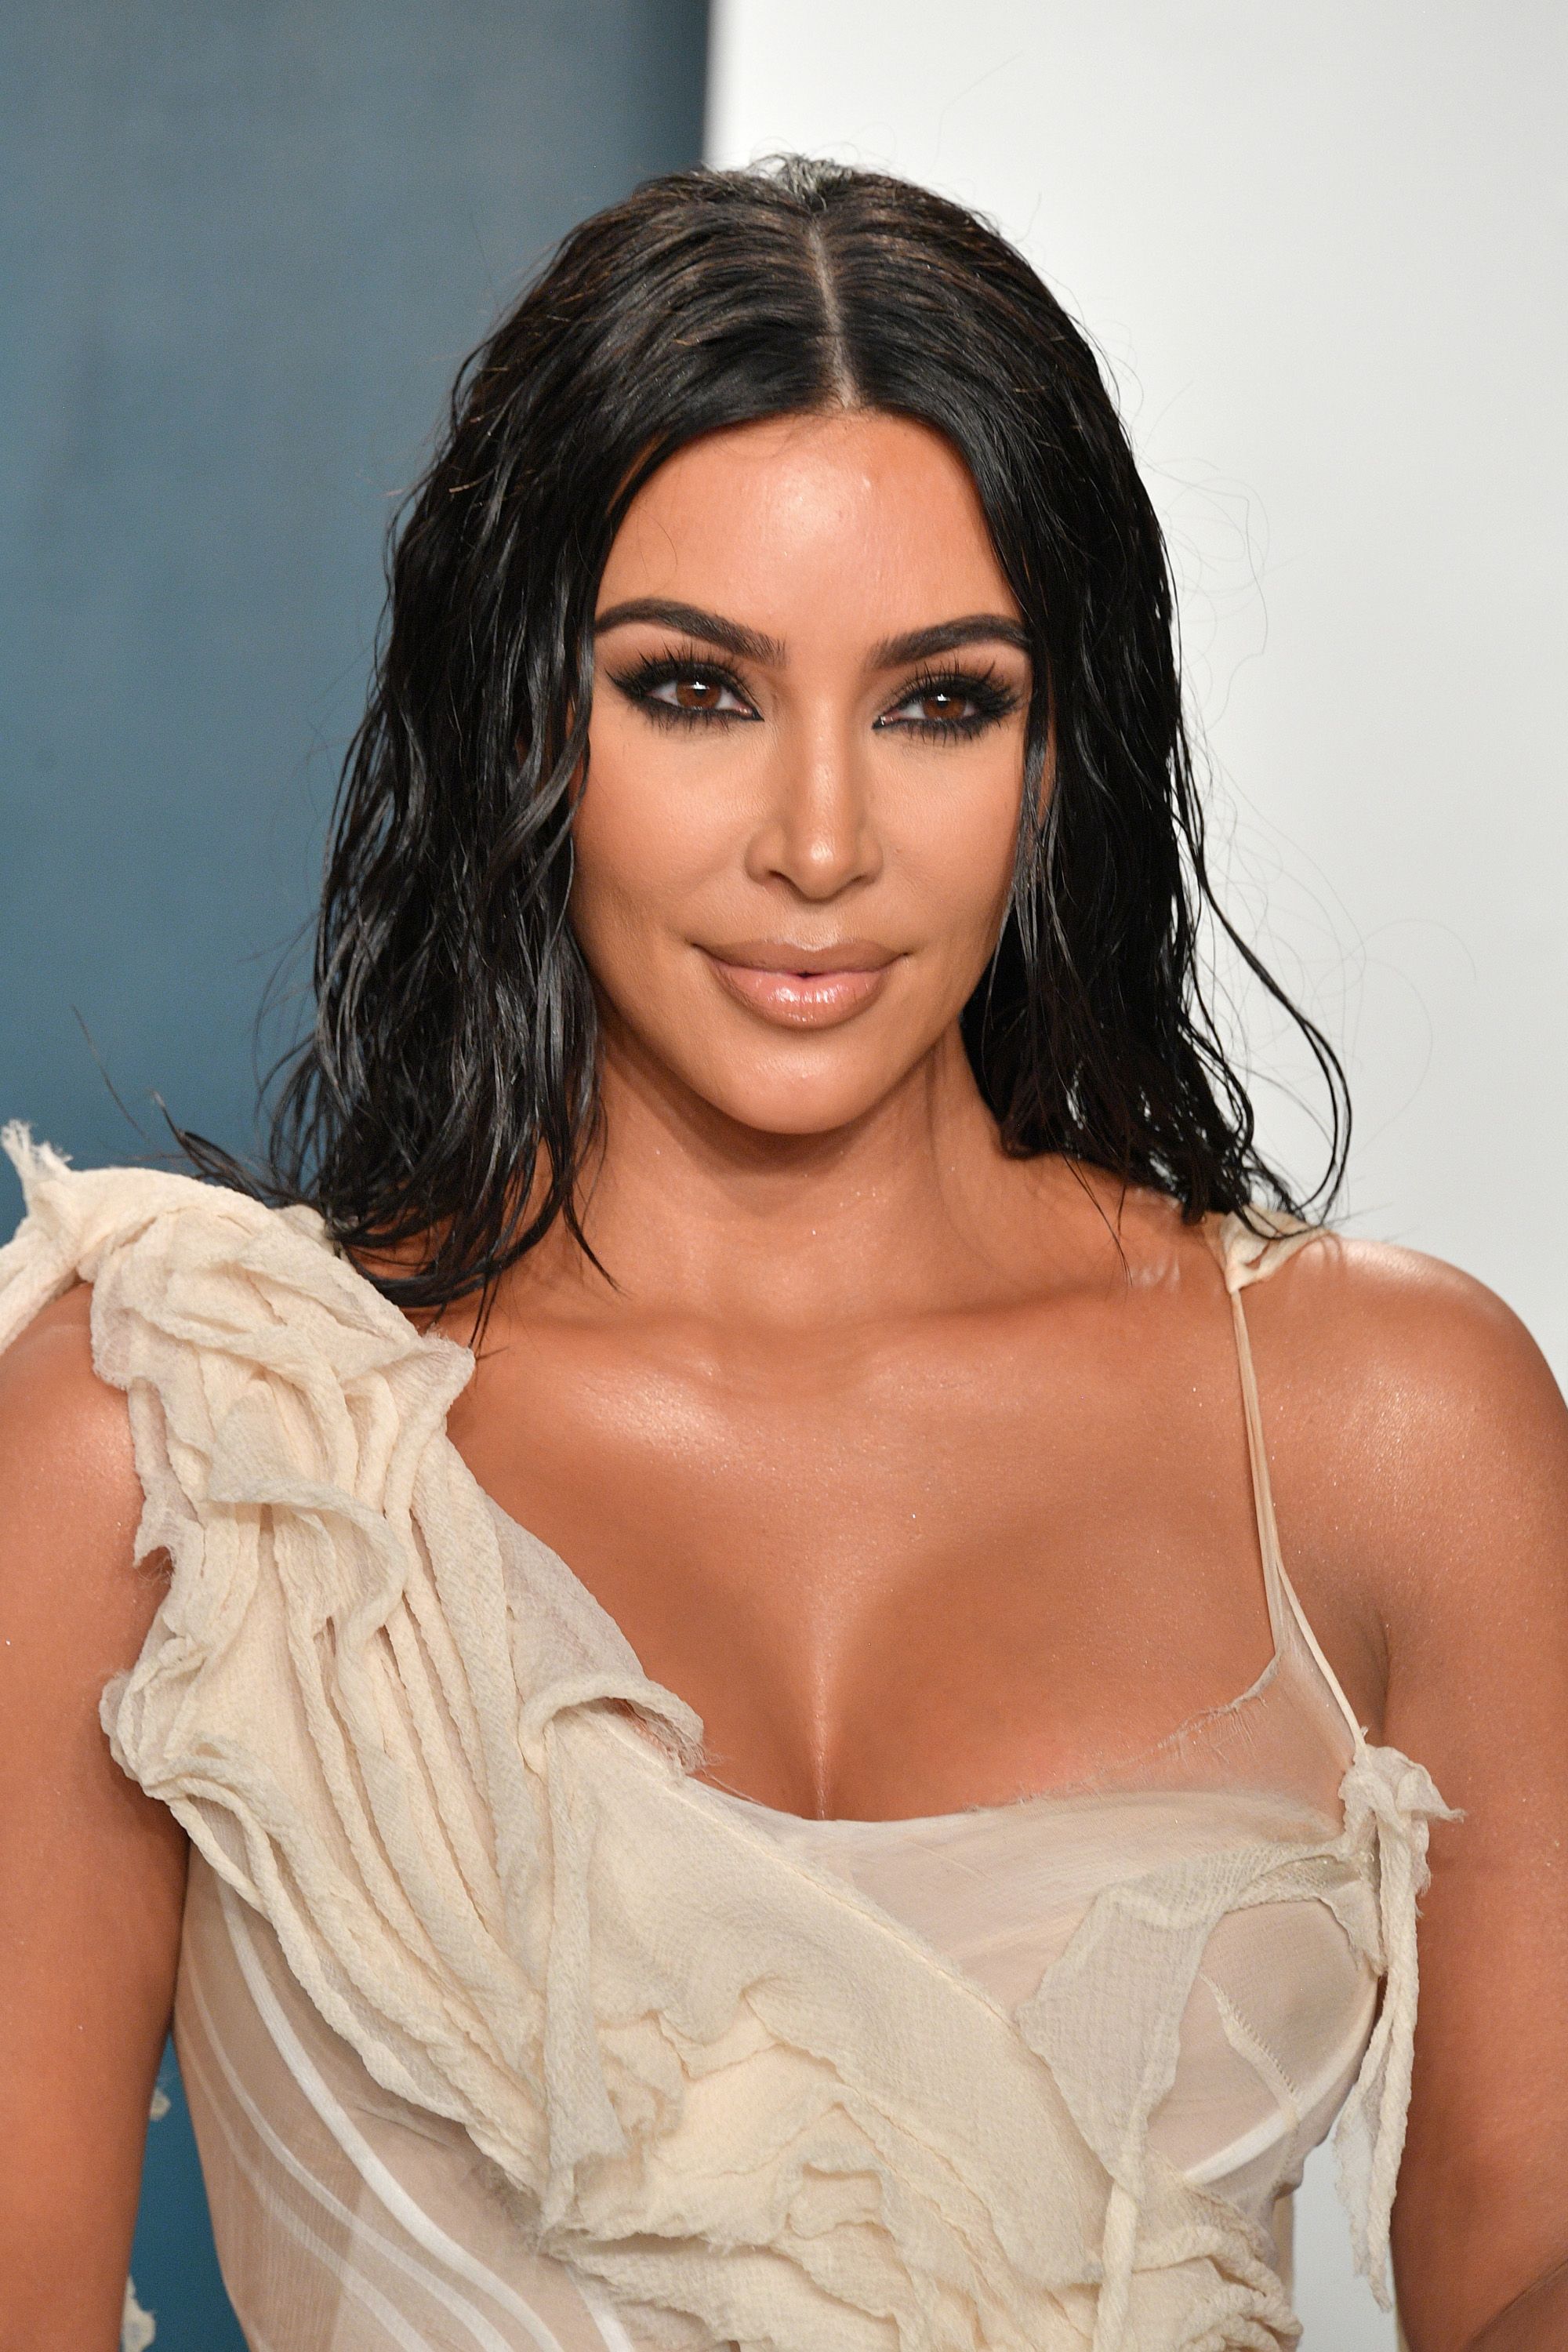 Kim Kardashian looks incredible with her new sun-kissed hair extensions